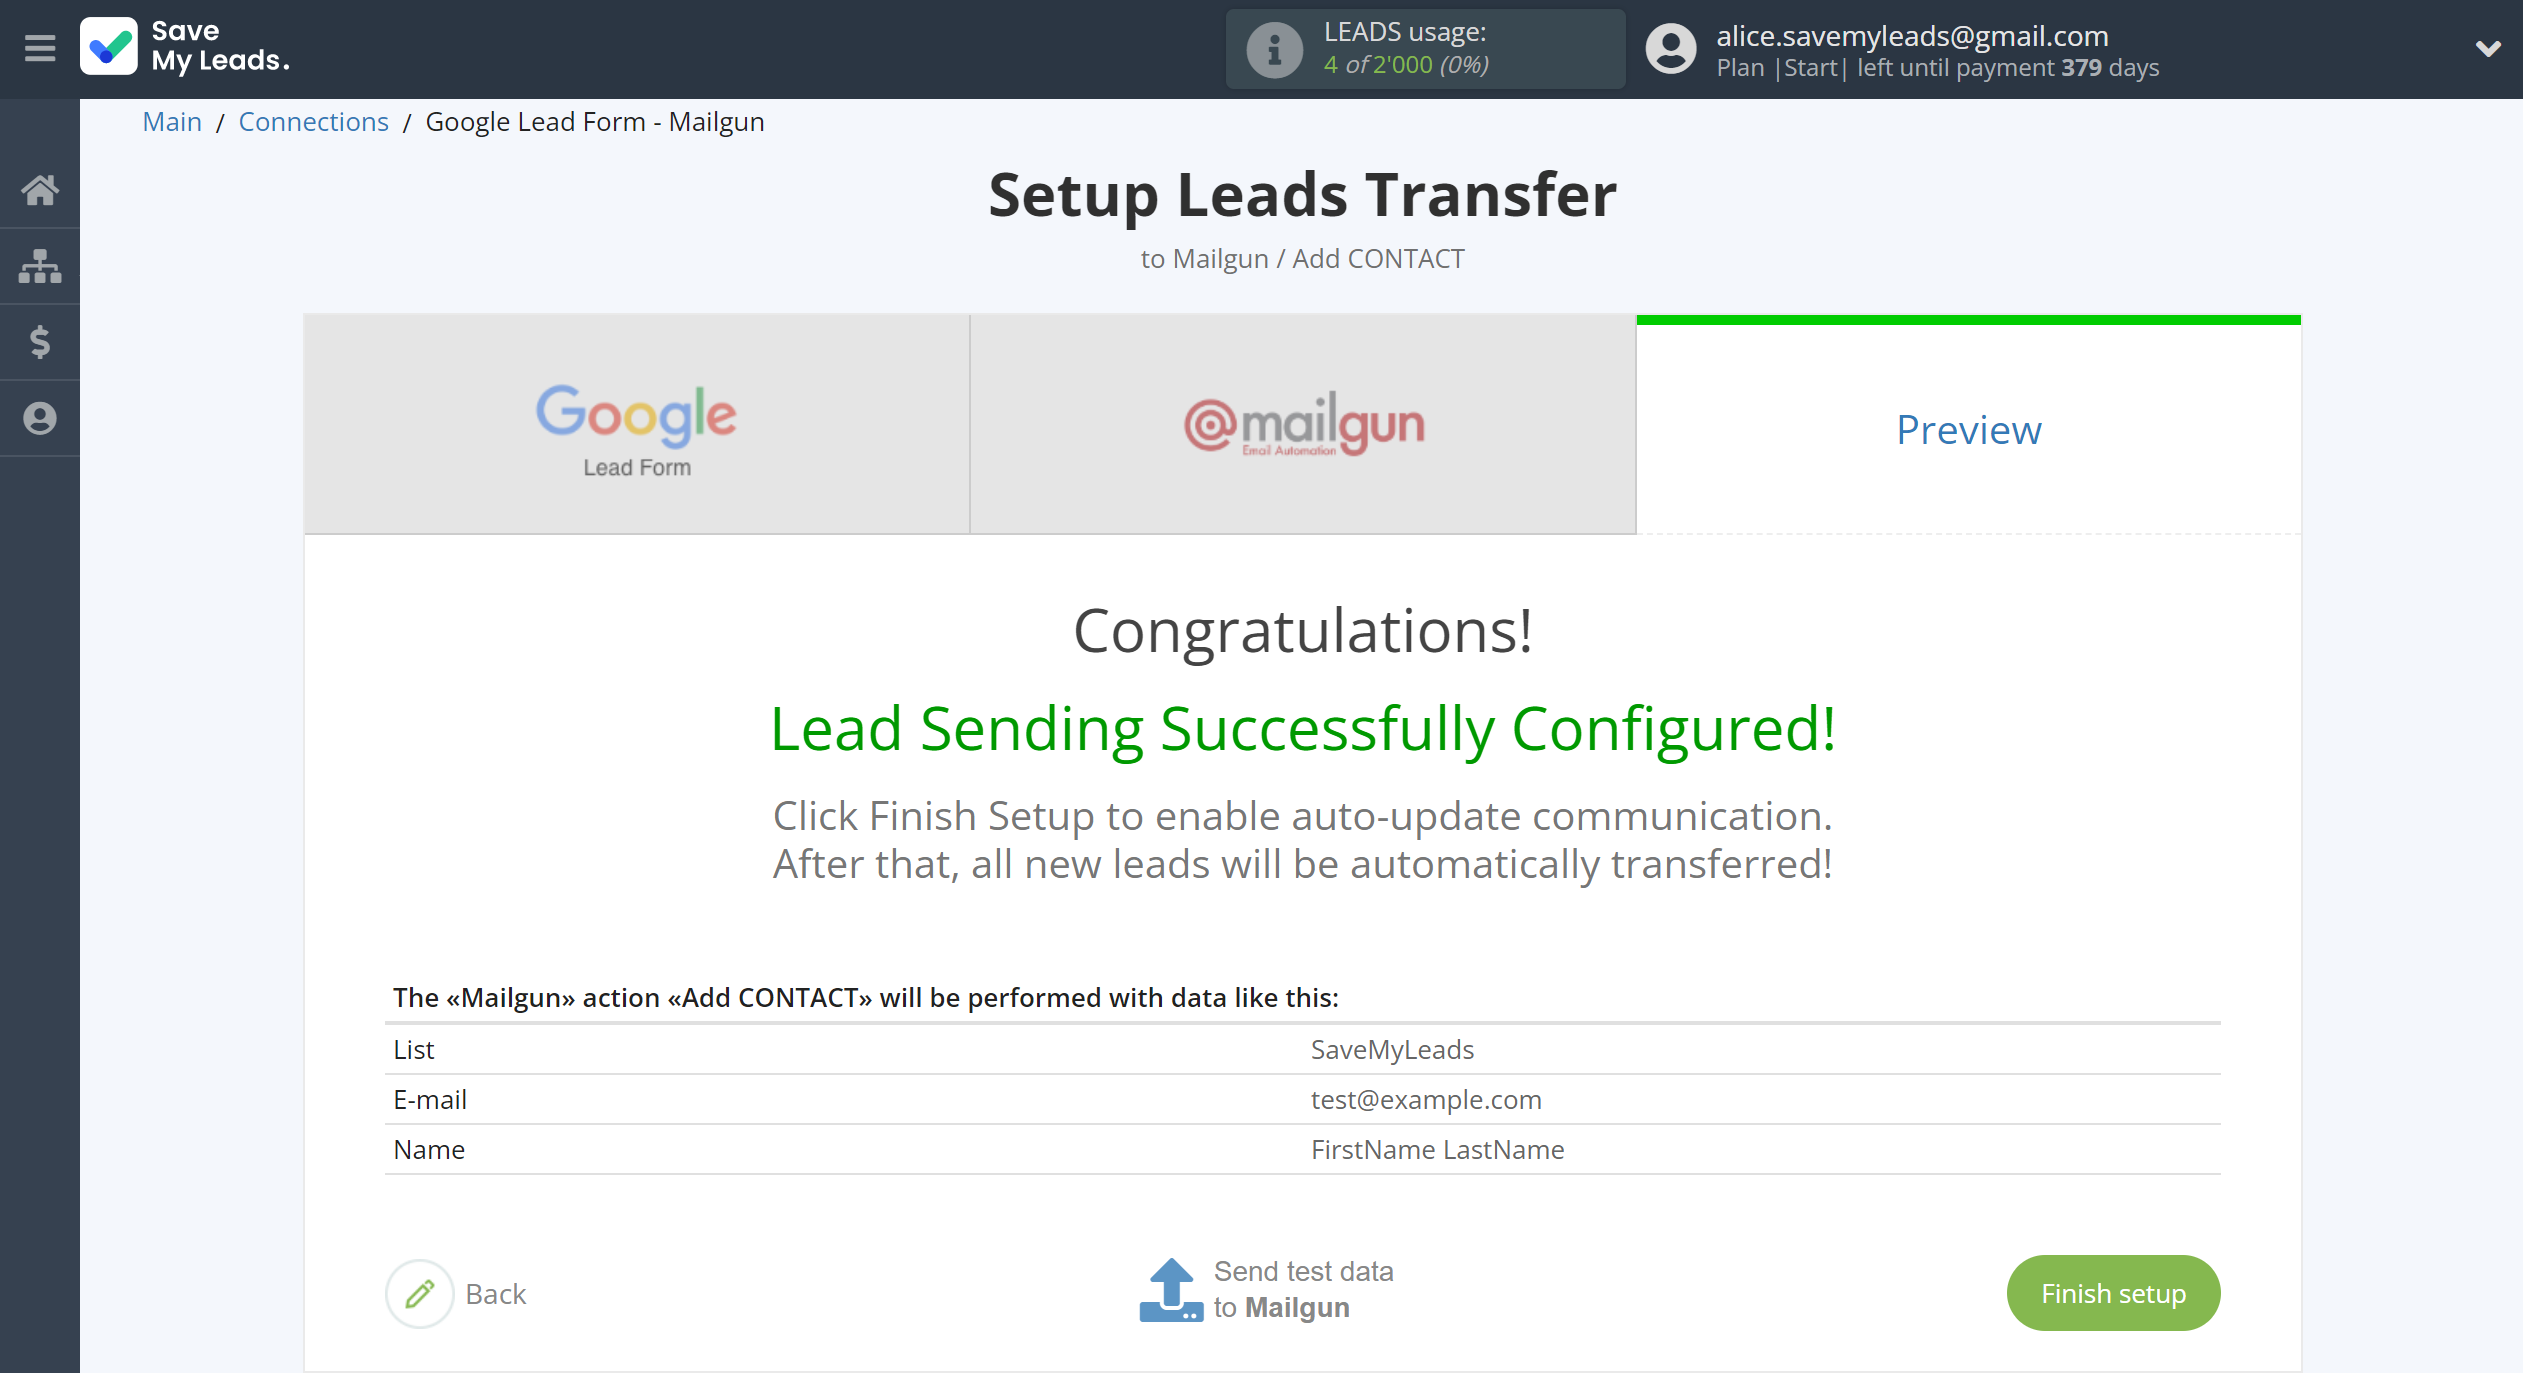 How to Connect Google Lead Form with Mailgun | Test data